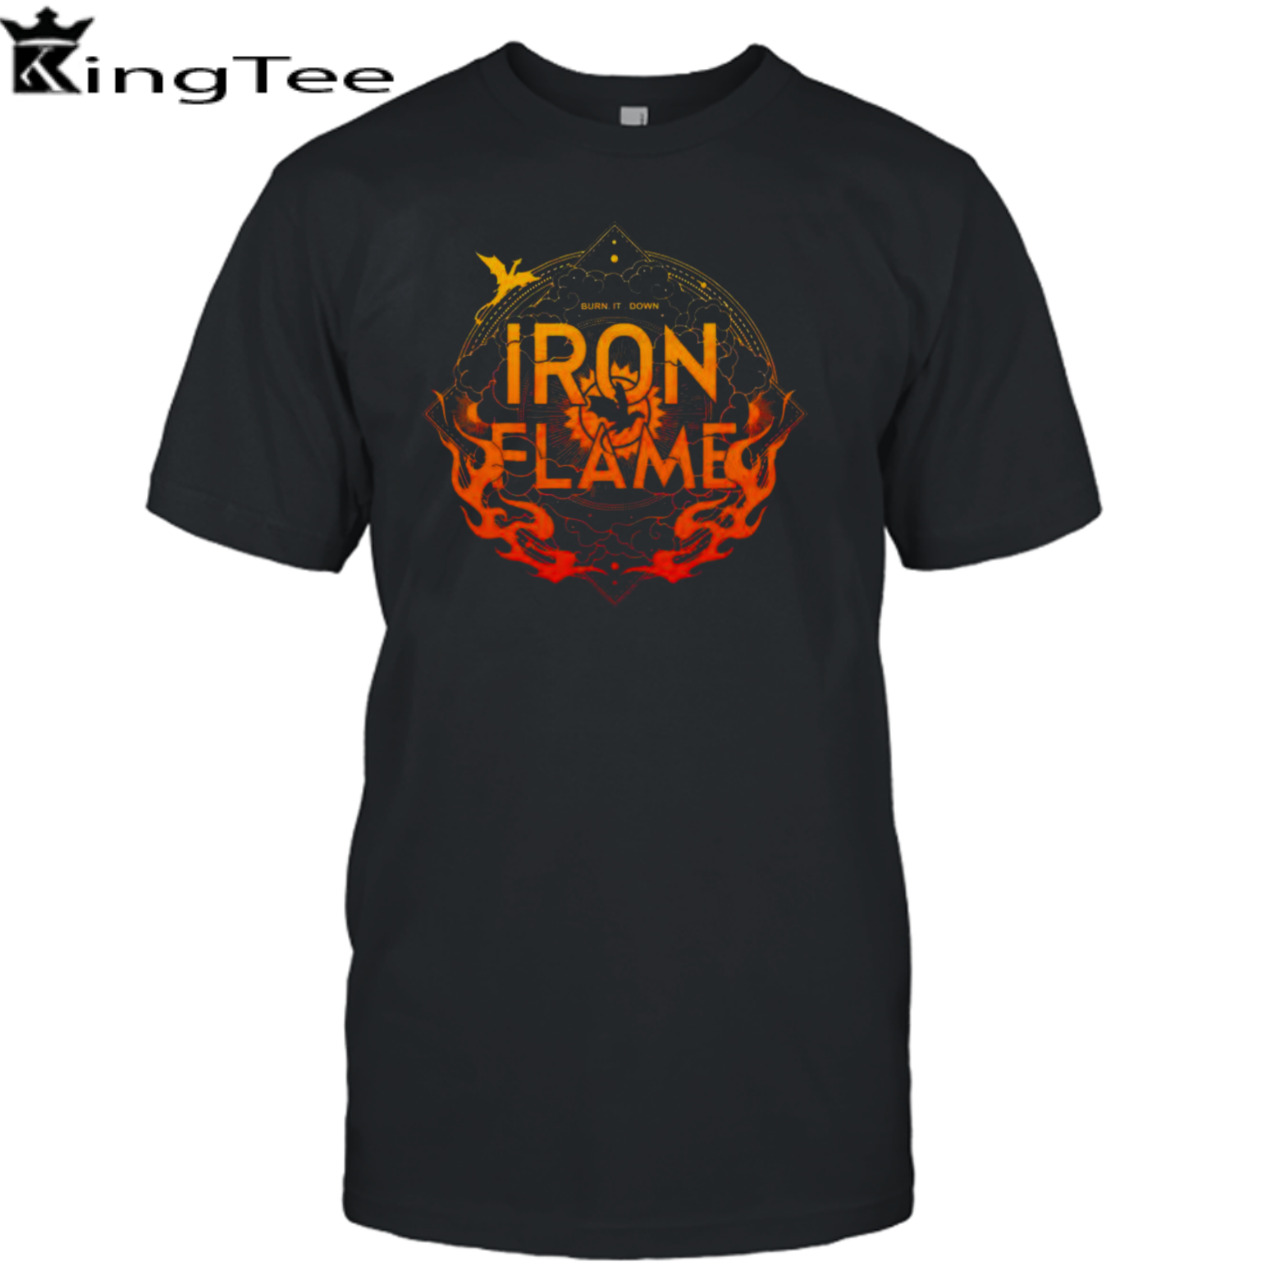 Iron Flame Fourth Wing Rebecca Yarros T-shirt